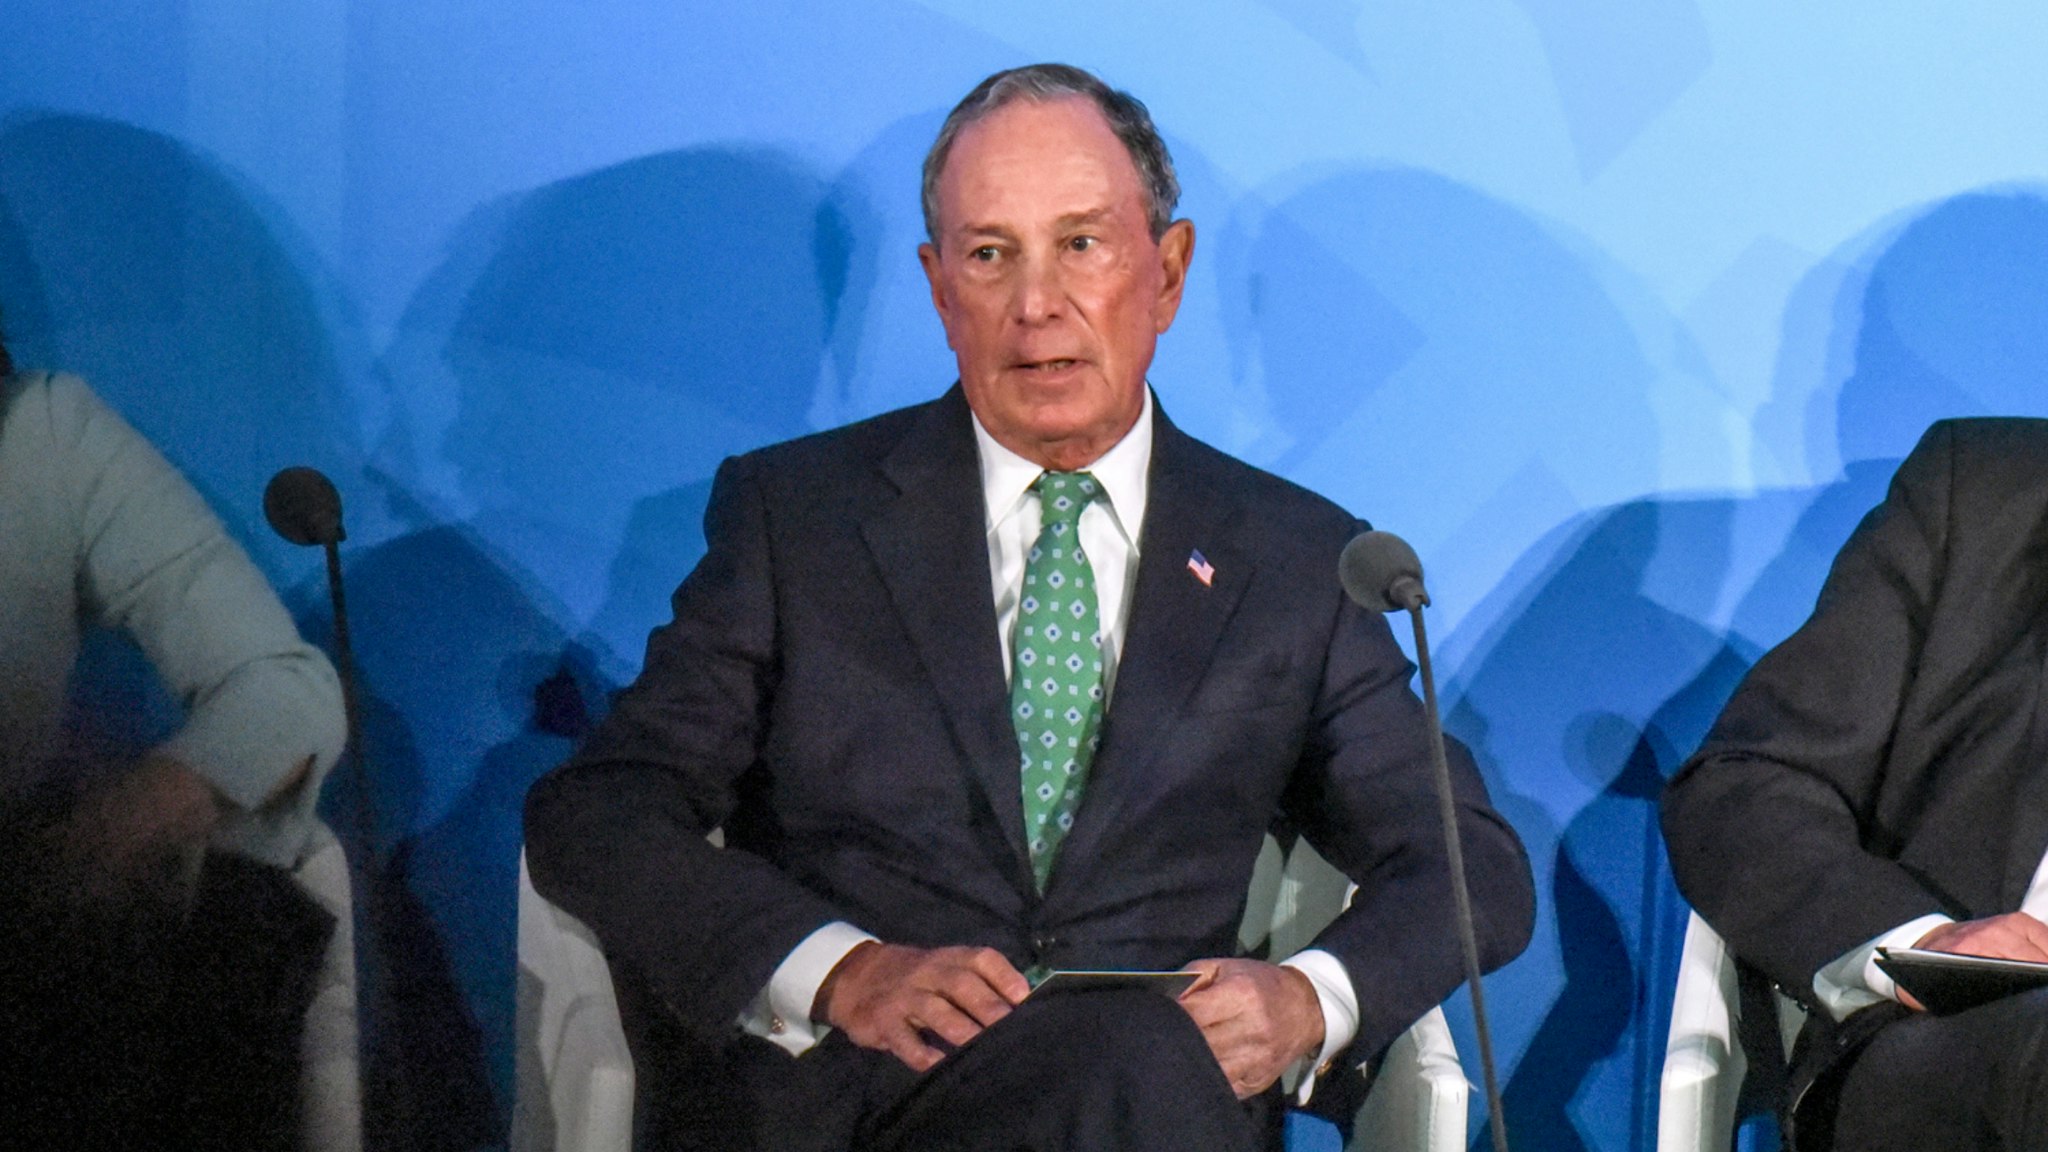 U.N. Special Envoy for Climate Action Michael Bloomberg speaks at the Climate Action Summit at the United Nations on September 23, 2019 in New York City.